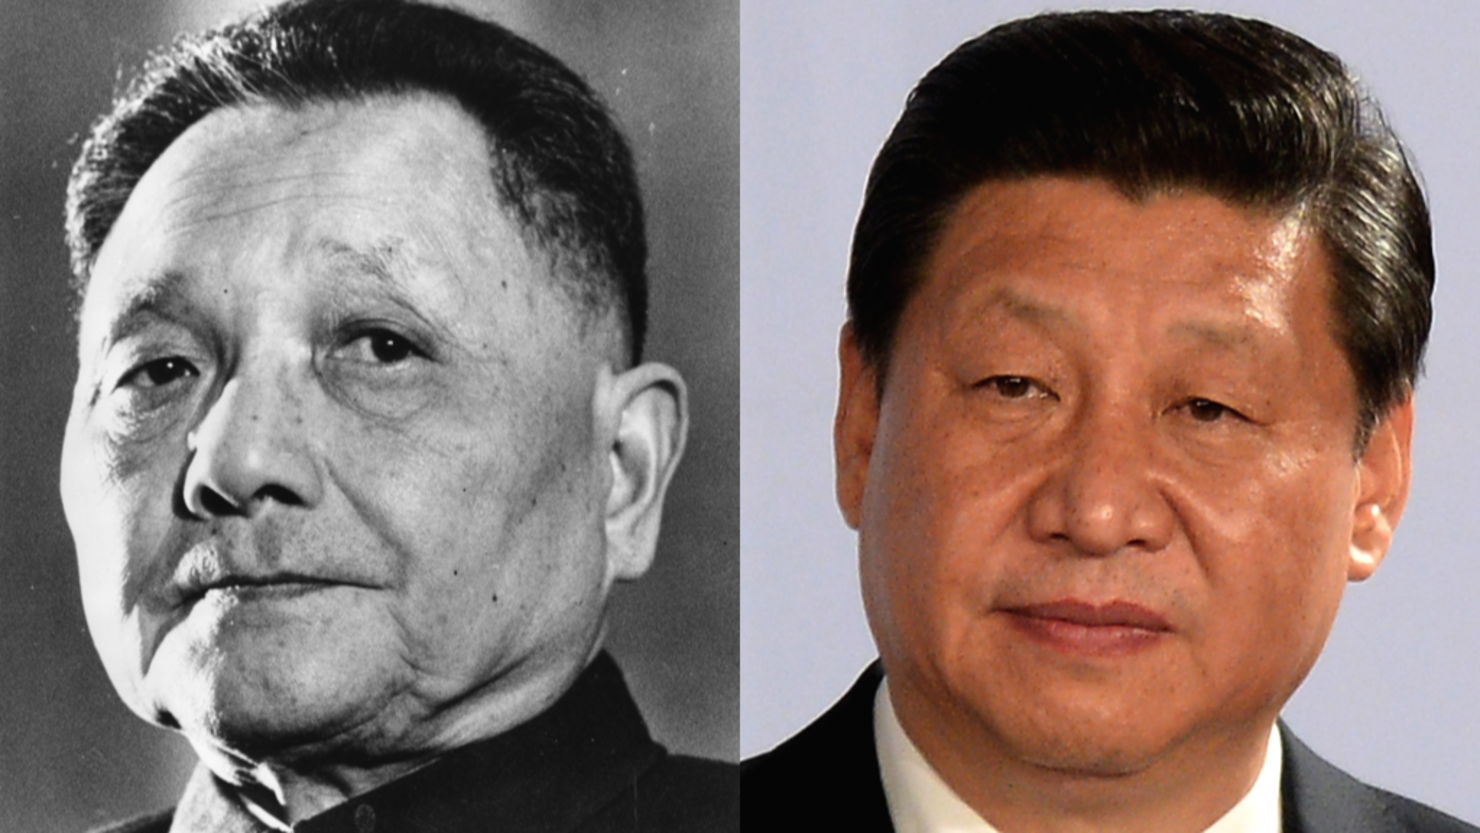 (Left) Deng Xiaoping ruled as "paramount leader" from 1978 to 1992; (right) Xi Jinping, current president of the People's Republic of China.